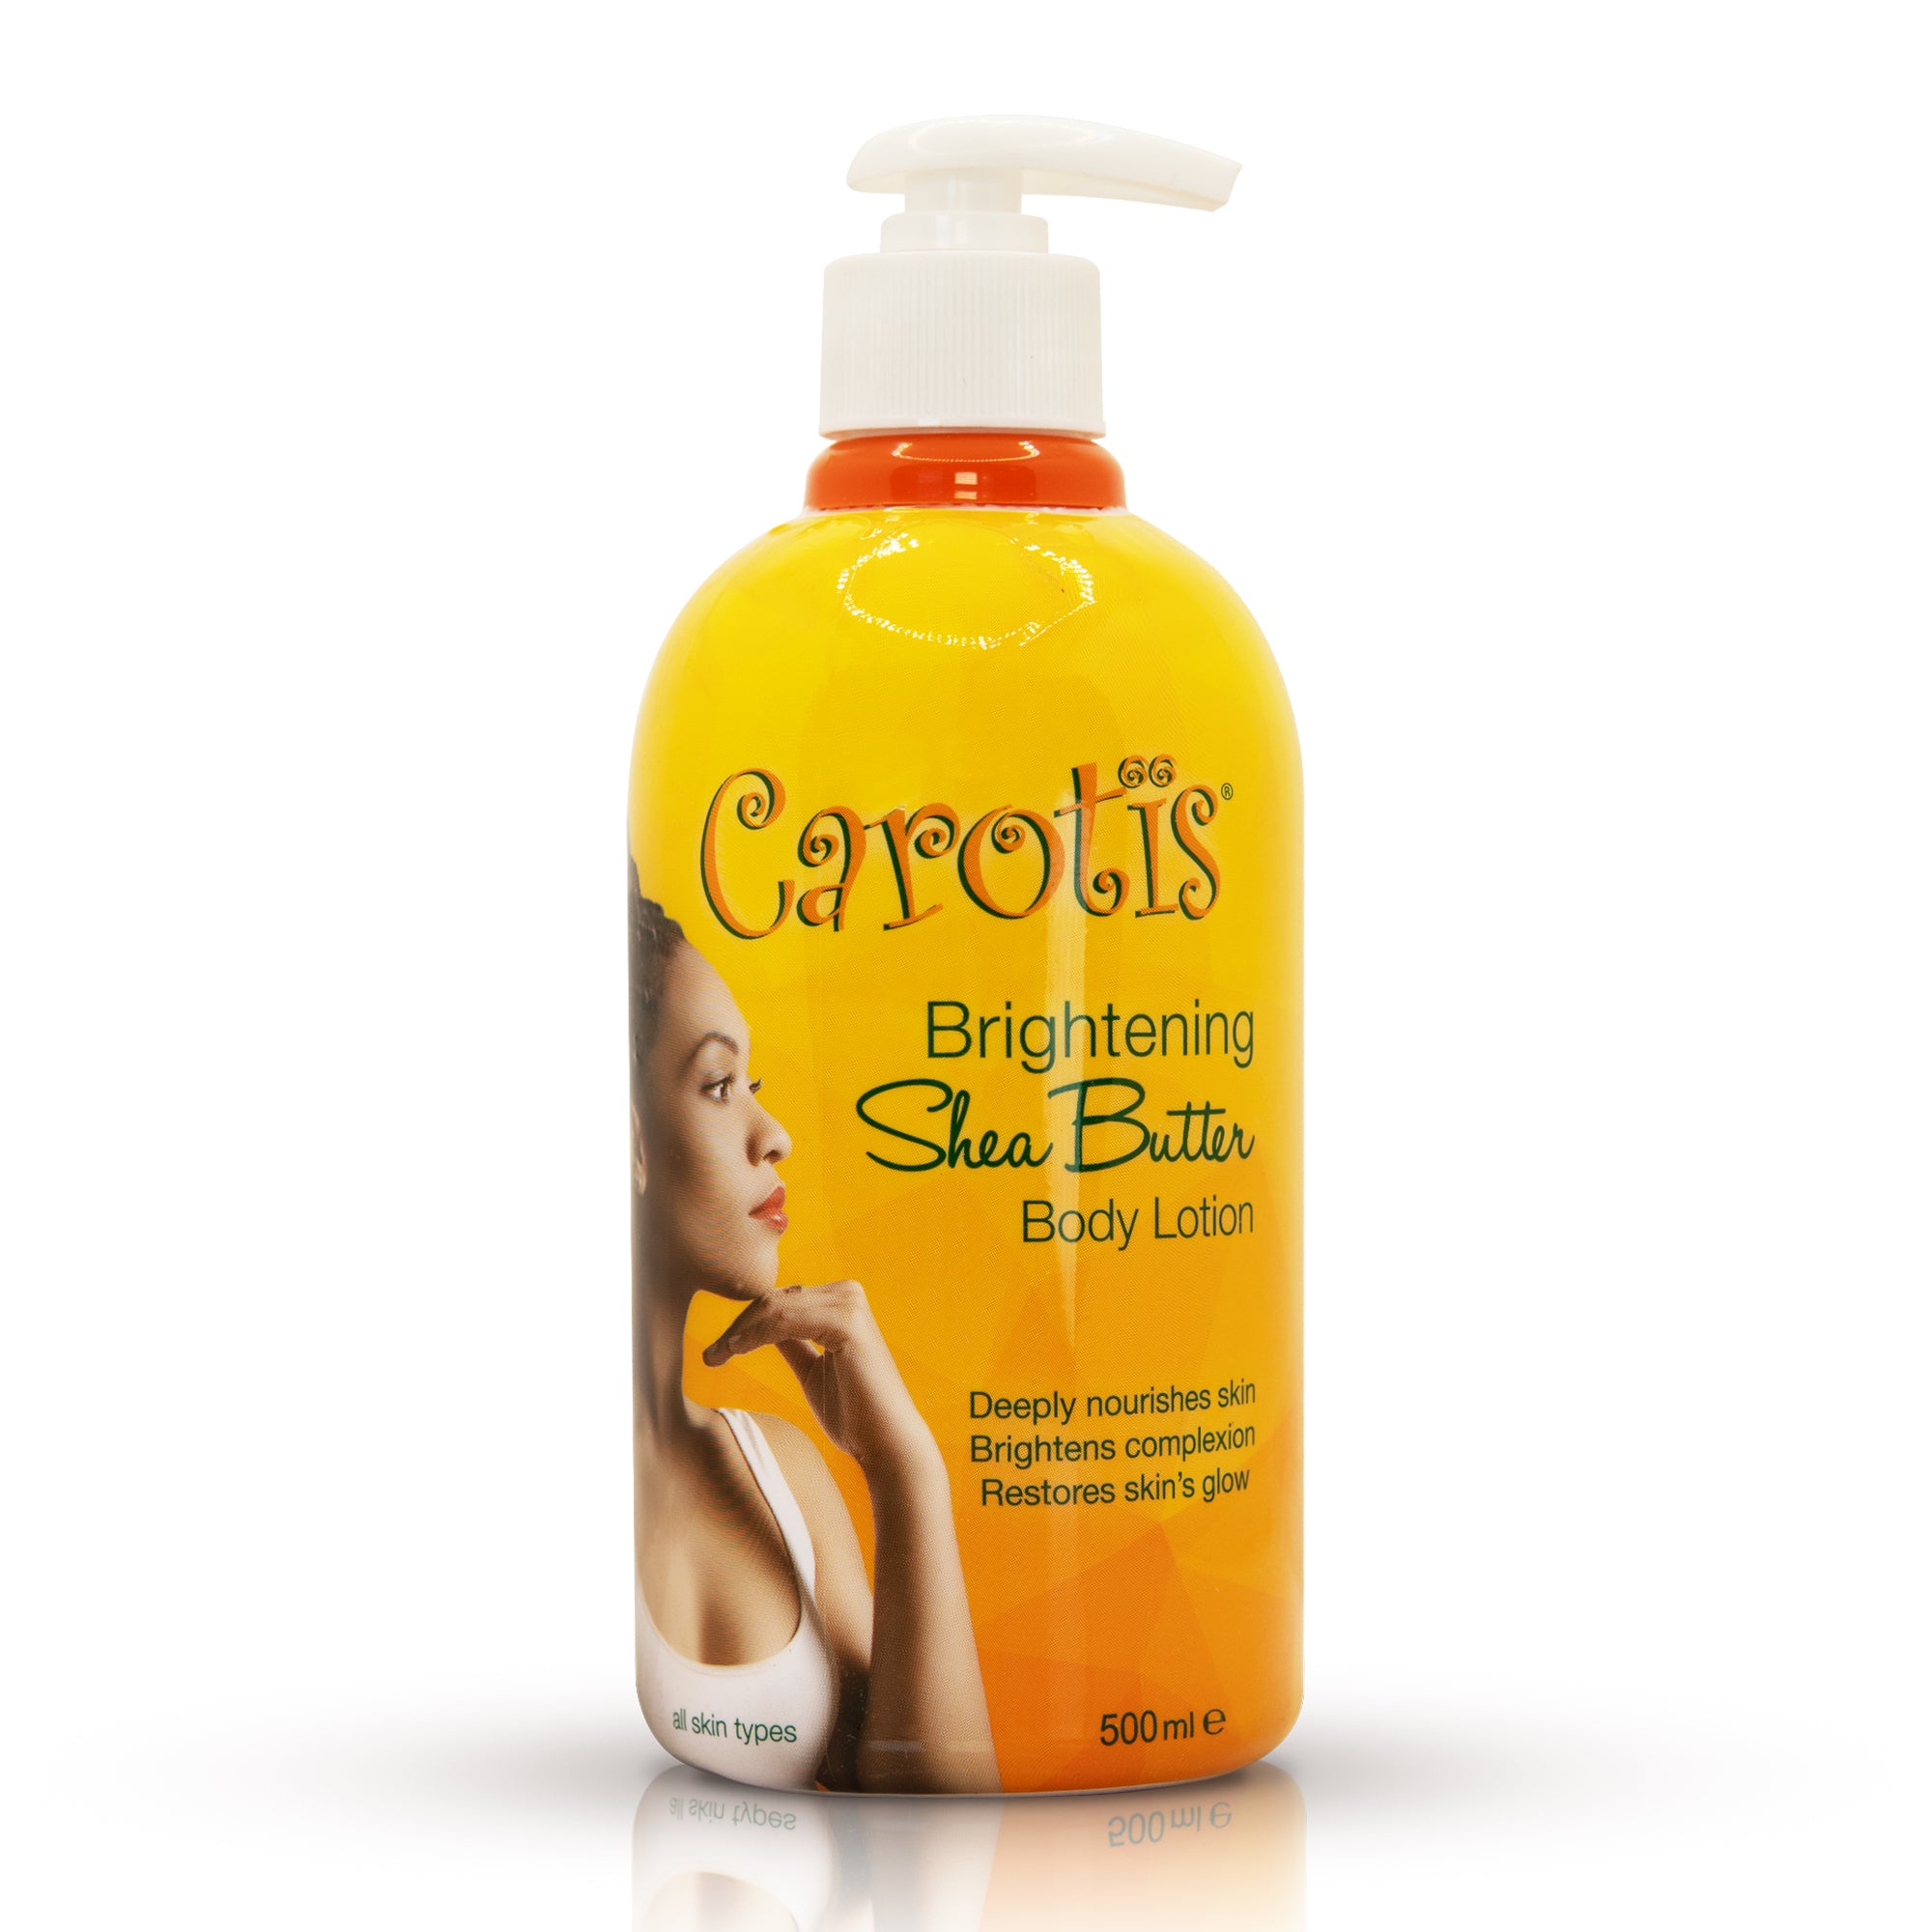 Carotis Brightening Shea Butter Body Lotion with Vitamin A - 500ml / 17.6 fl oz Mitchell Brands - Mitchell Brands - Skin Lightening, Skin Brightening, Fade Dark Spots, Shea Butter, Hair Growth Products